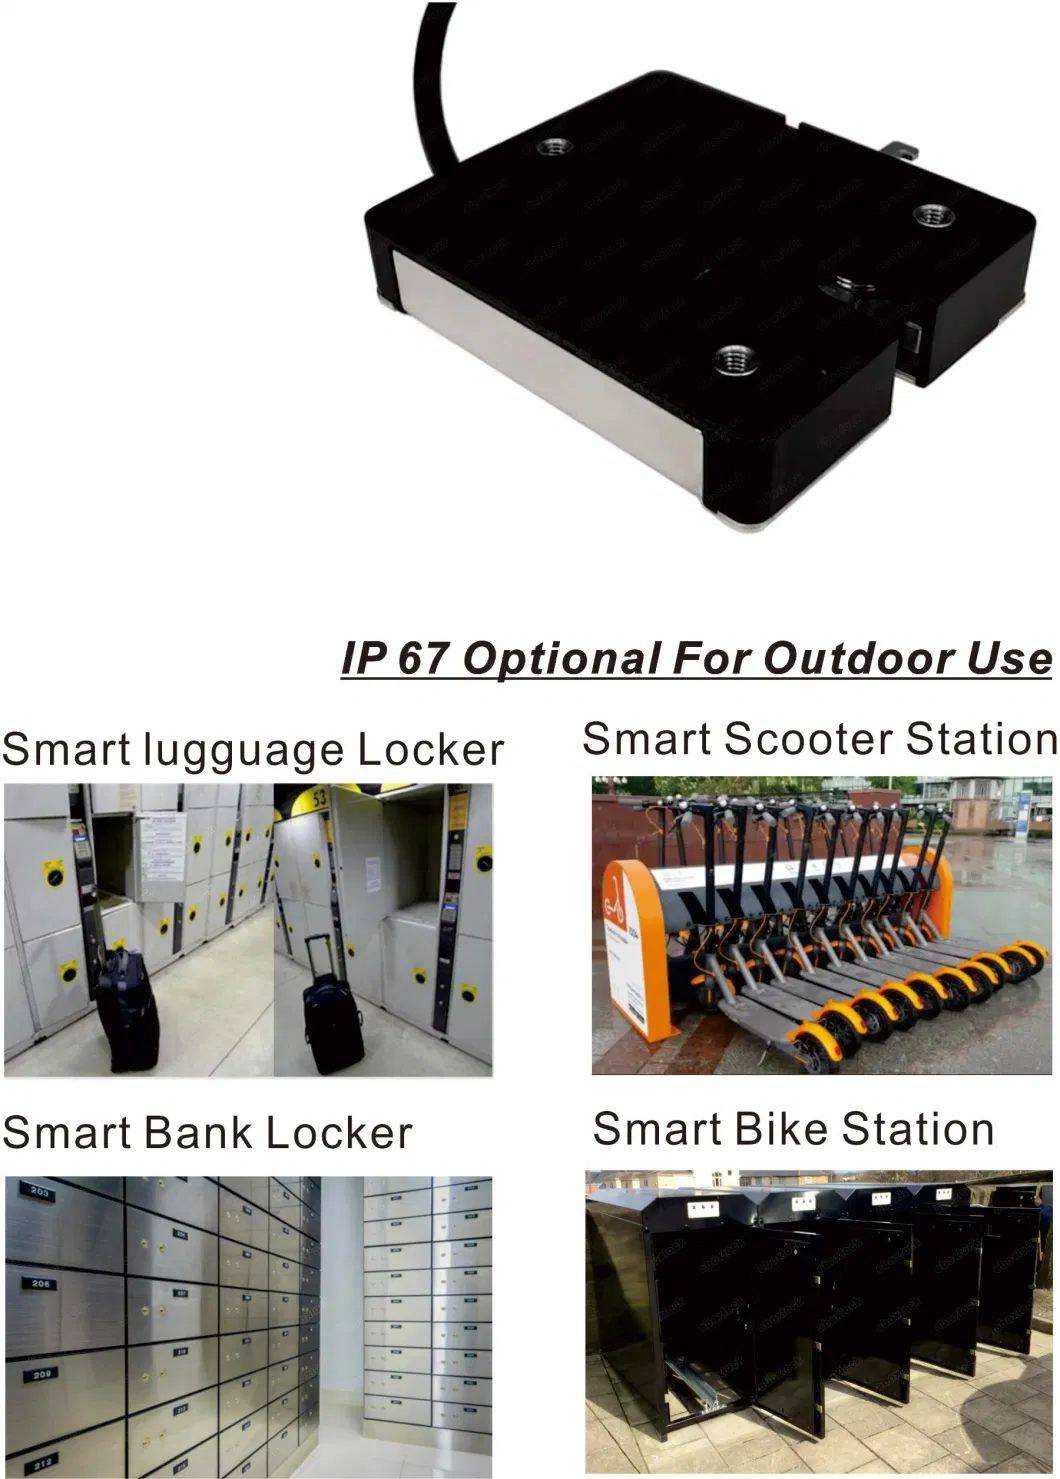 Waterproof Electromagnetic Lock for Outdoor Vending Lockers and Electronic Industrial Cabinets.